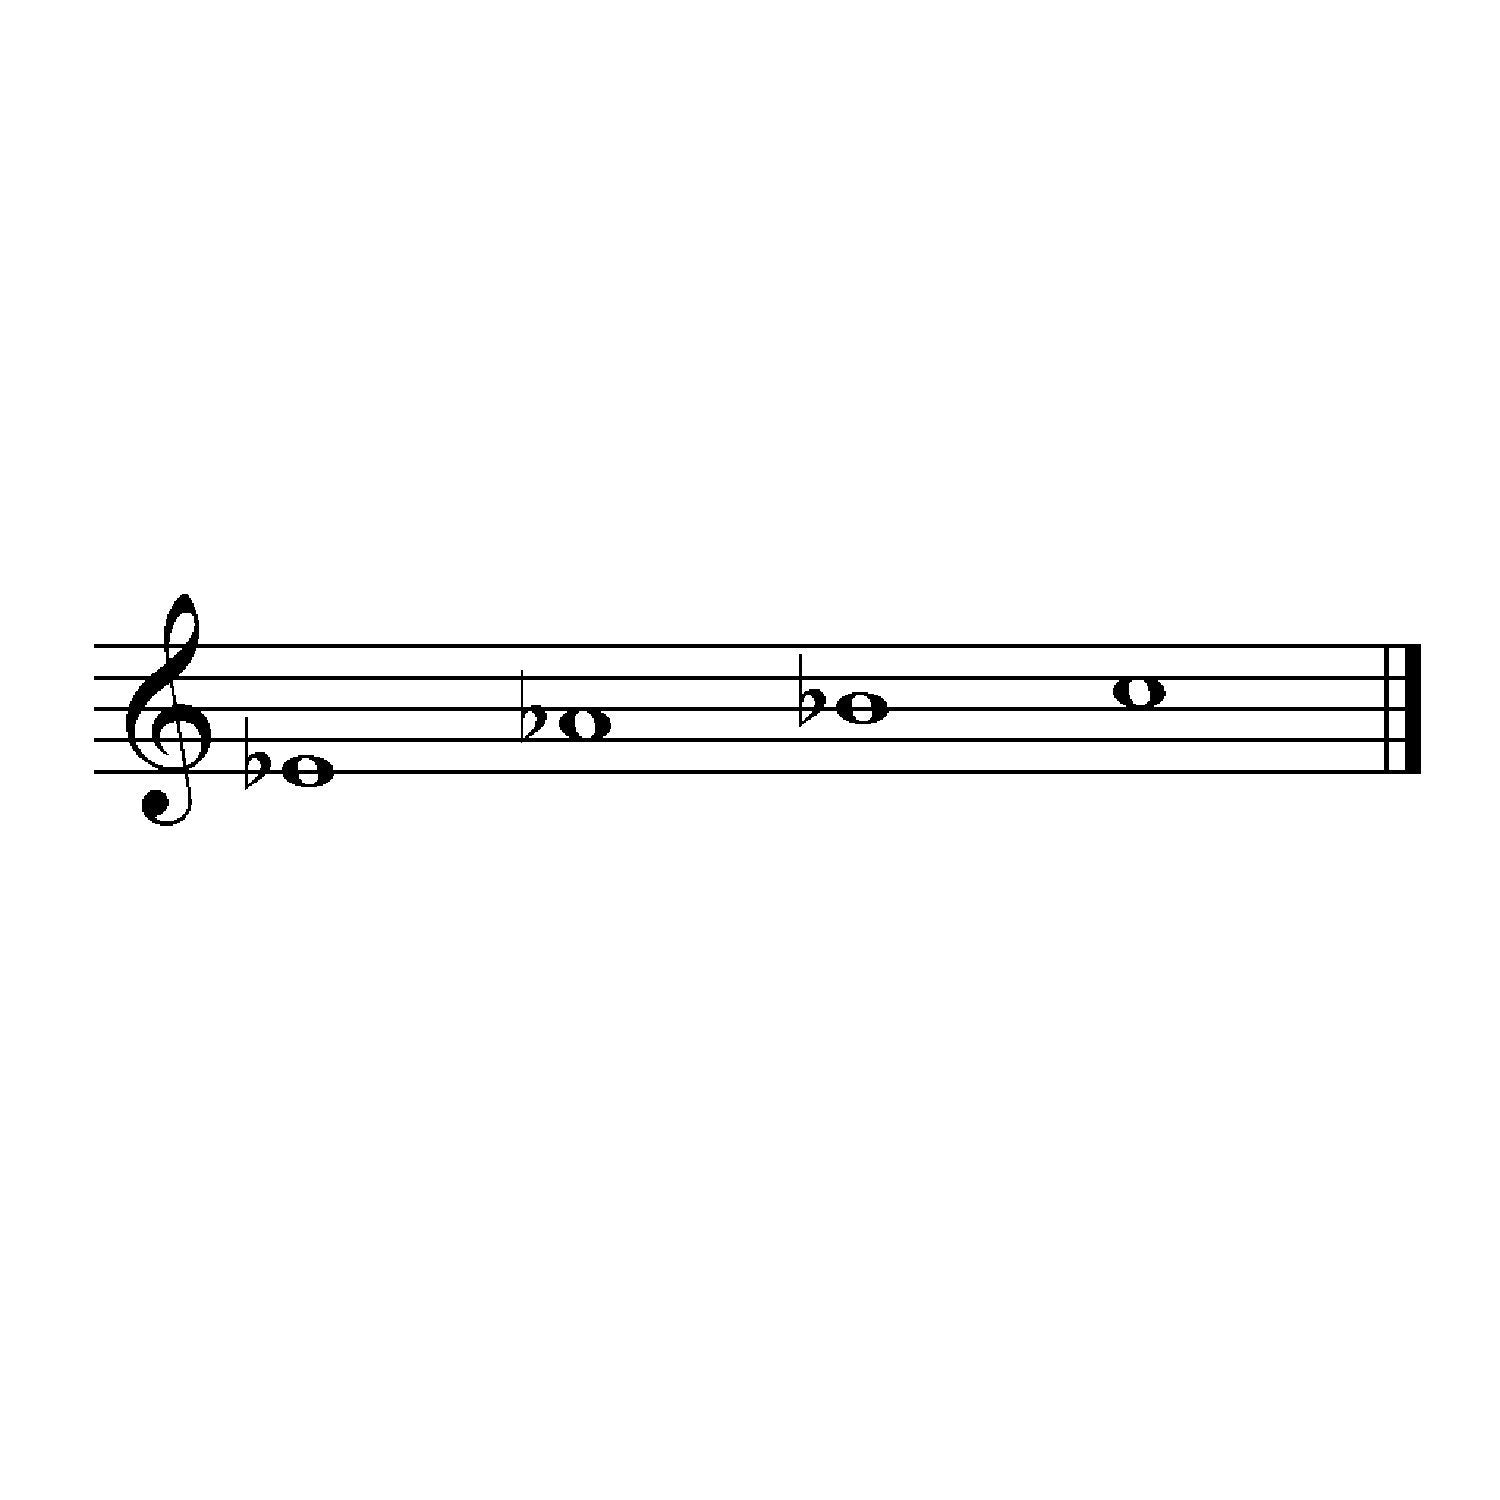 Encore Chimes of Saturn - Black musical scale